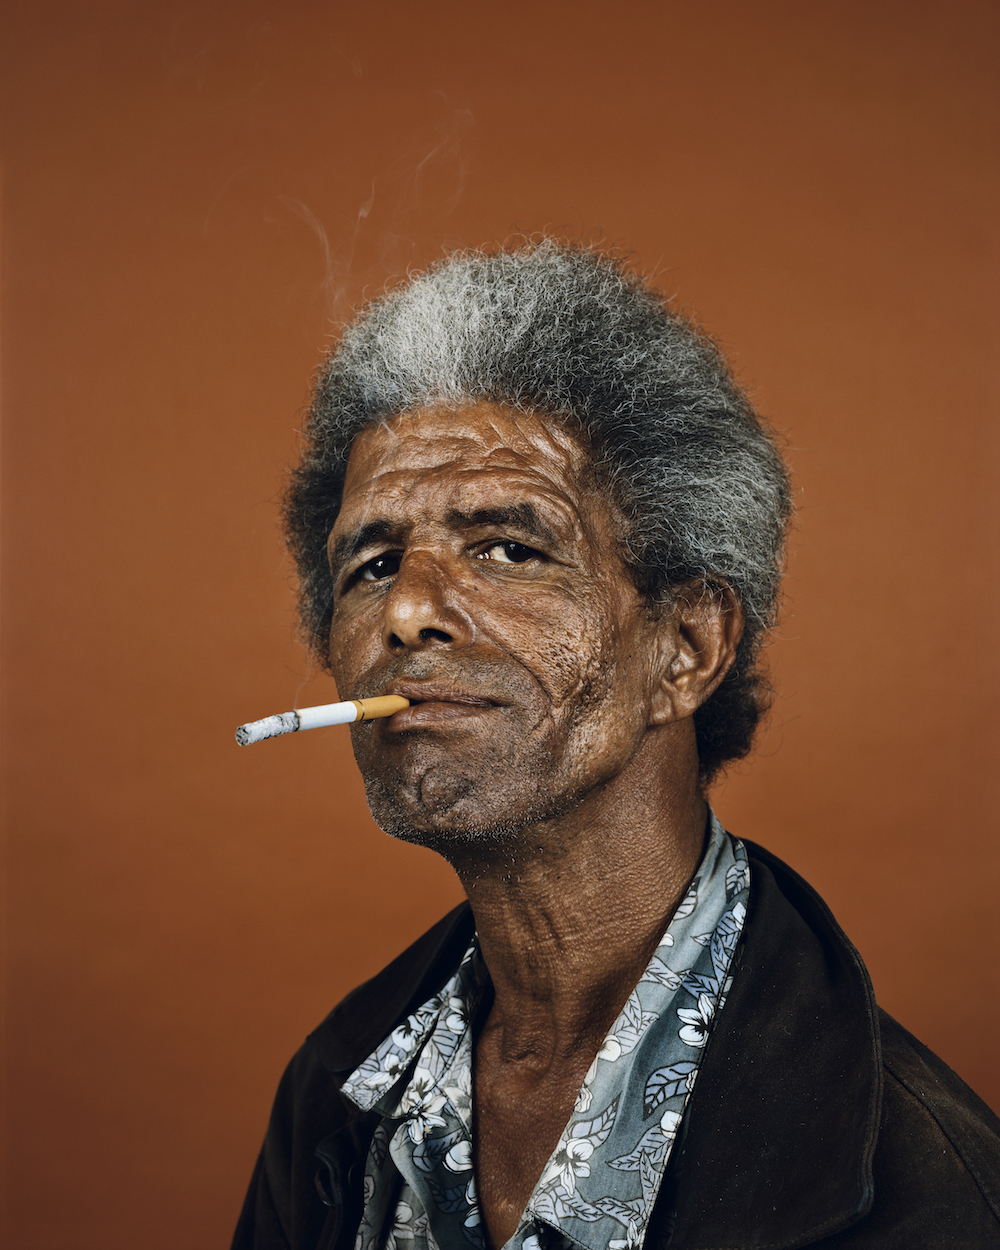 Pieter Hugo, "Shaun Oliver," Cape Town, 2011, from the Kin series. Courtesy of the artist and Les Rencontres d'Arles.